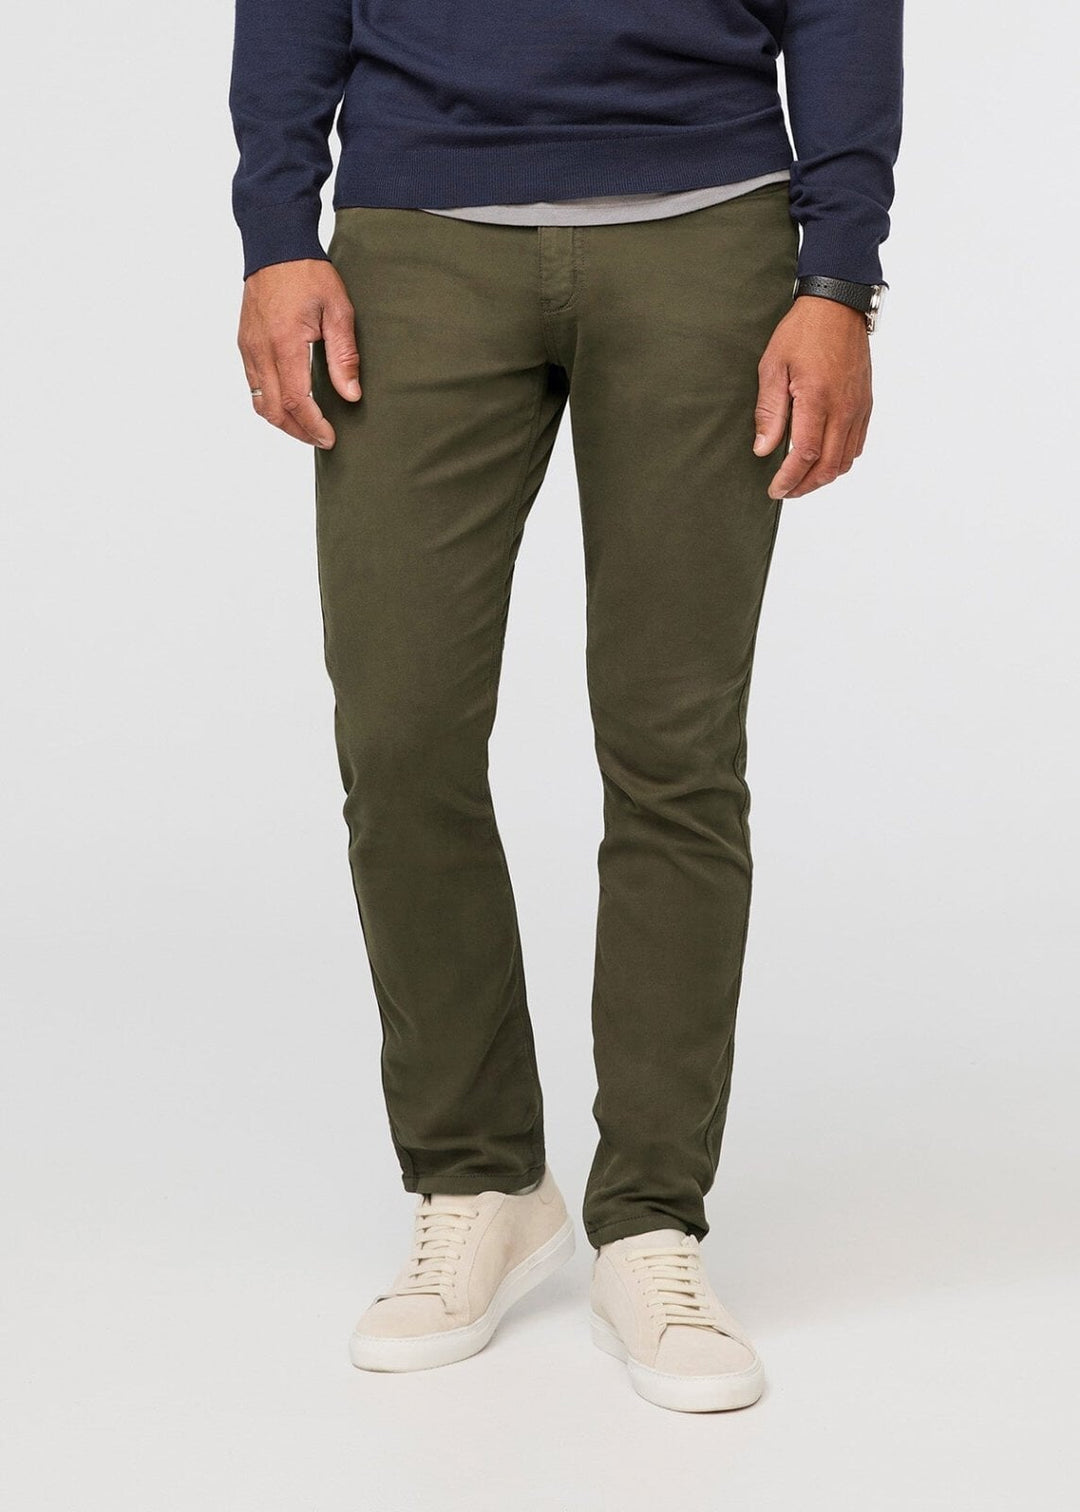 DUER no sweat relaxed taper pant – Mountain and Company